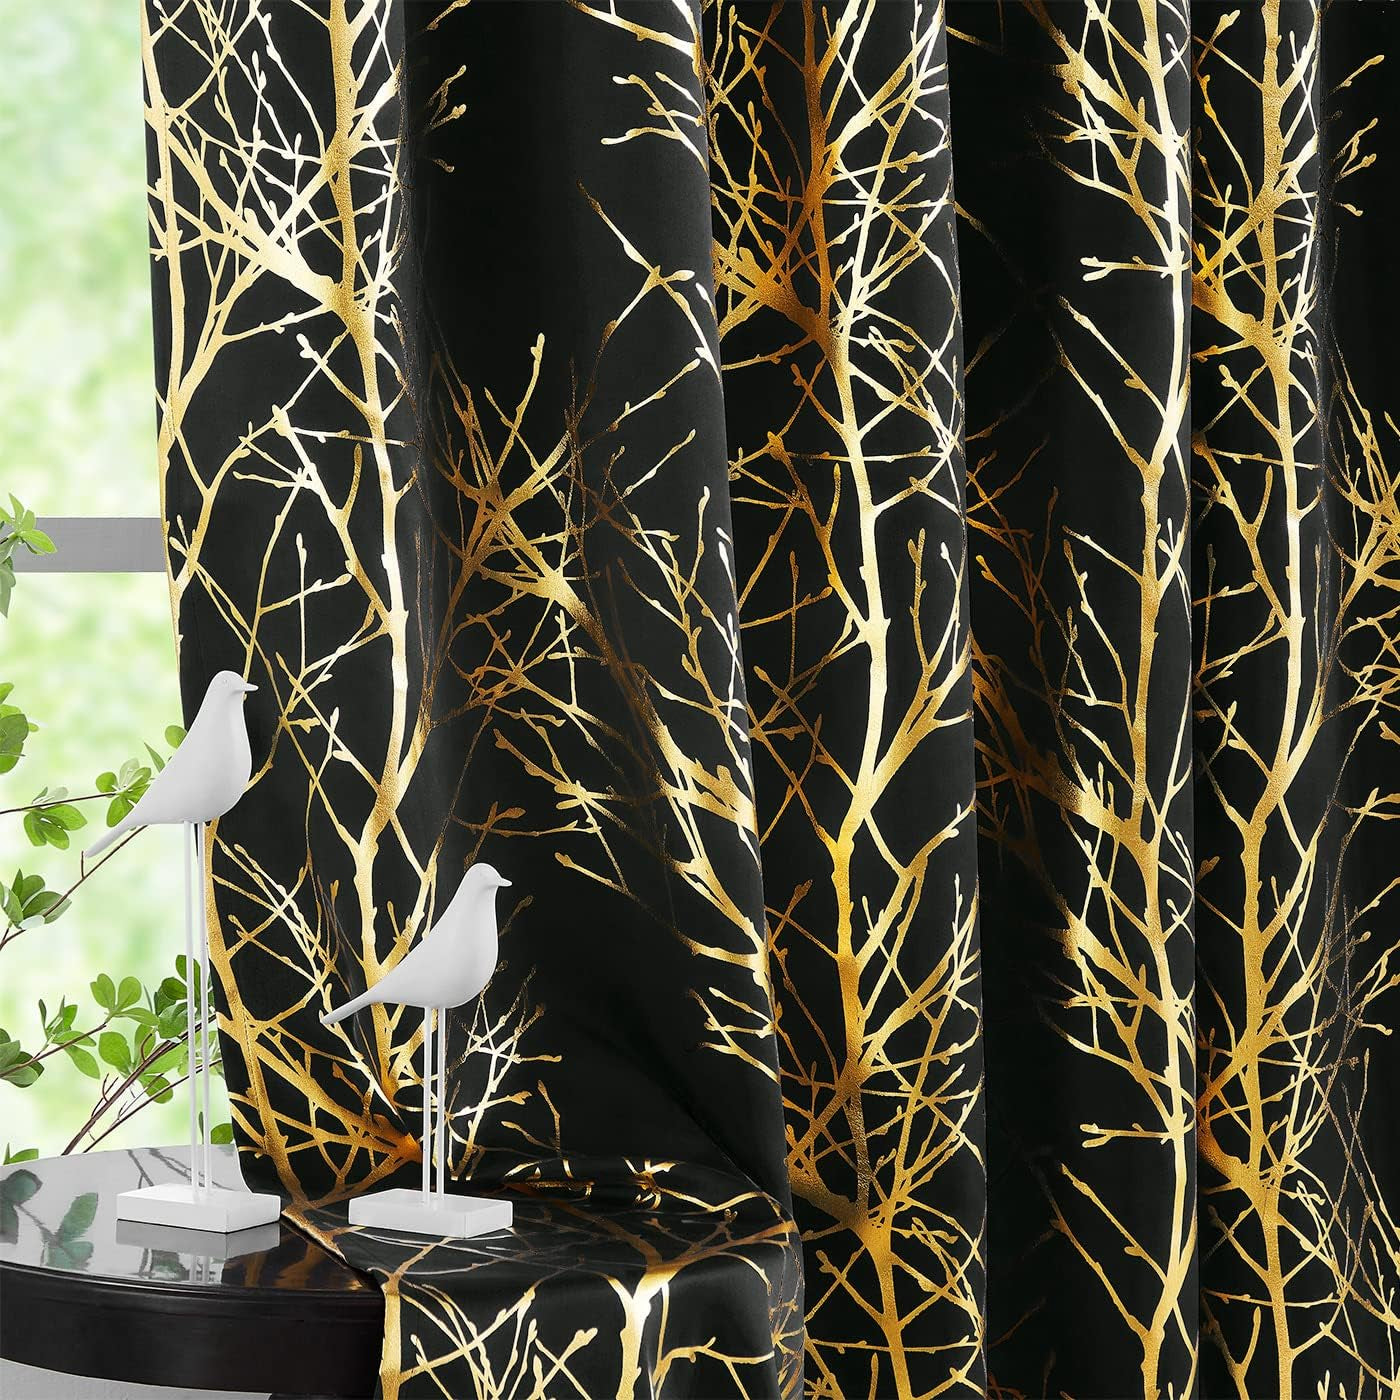 FMFUNCTEX Metallic Tree Blackout Curtains Bedroom Grey 84-Inch Living-Room Branch Print Curtain Panels Forest Triple Weave Thermal Insulated Drapes for Windows Dorm Hotel Grommet Top, 2Panels  Fmfunctex Gold /Black 50"W X 63"L 2Pcs 